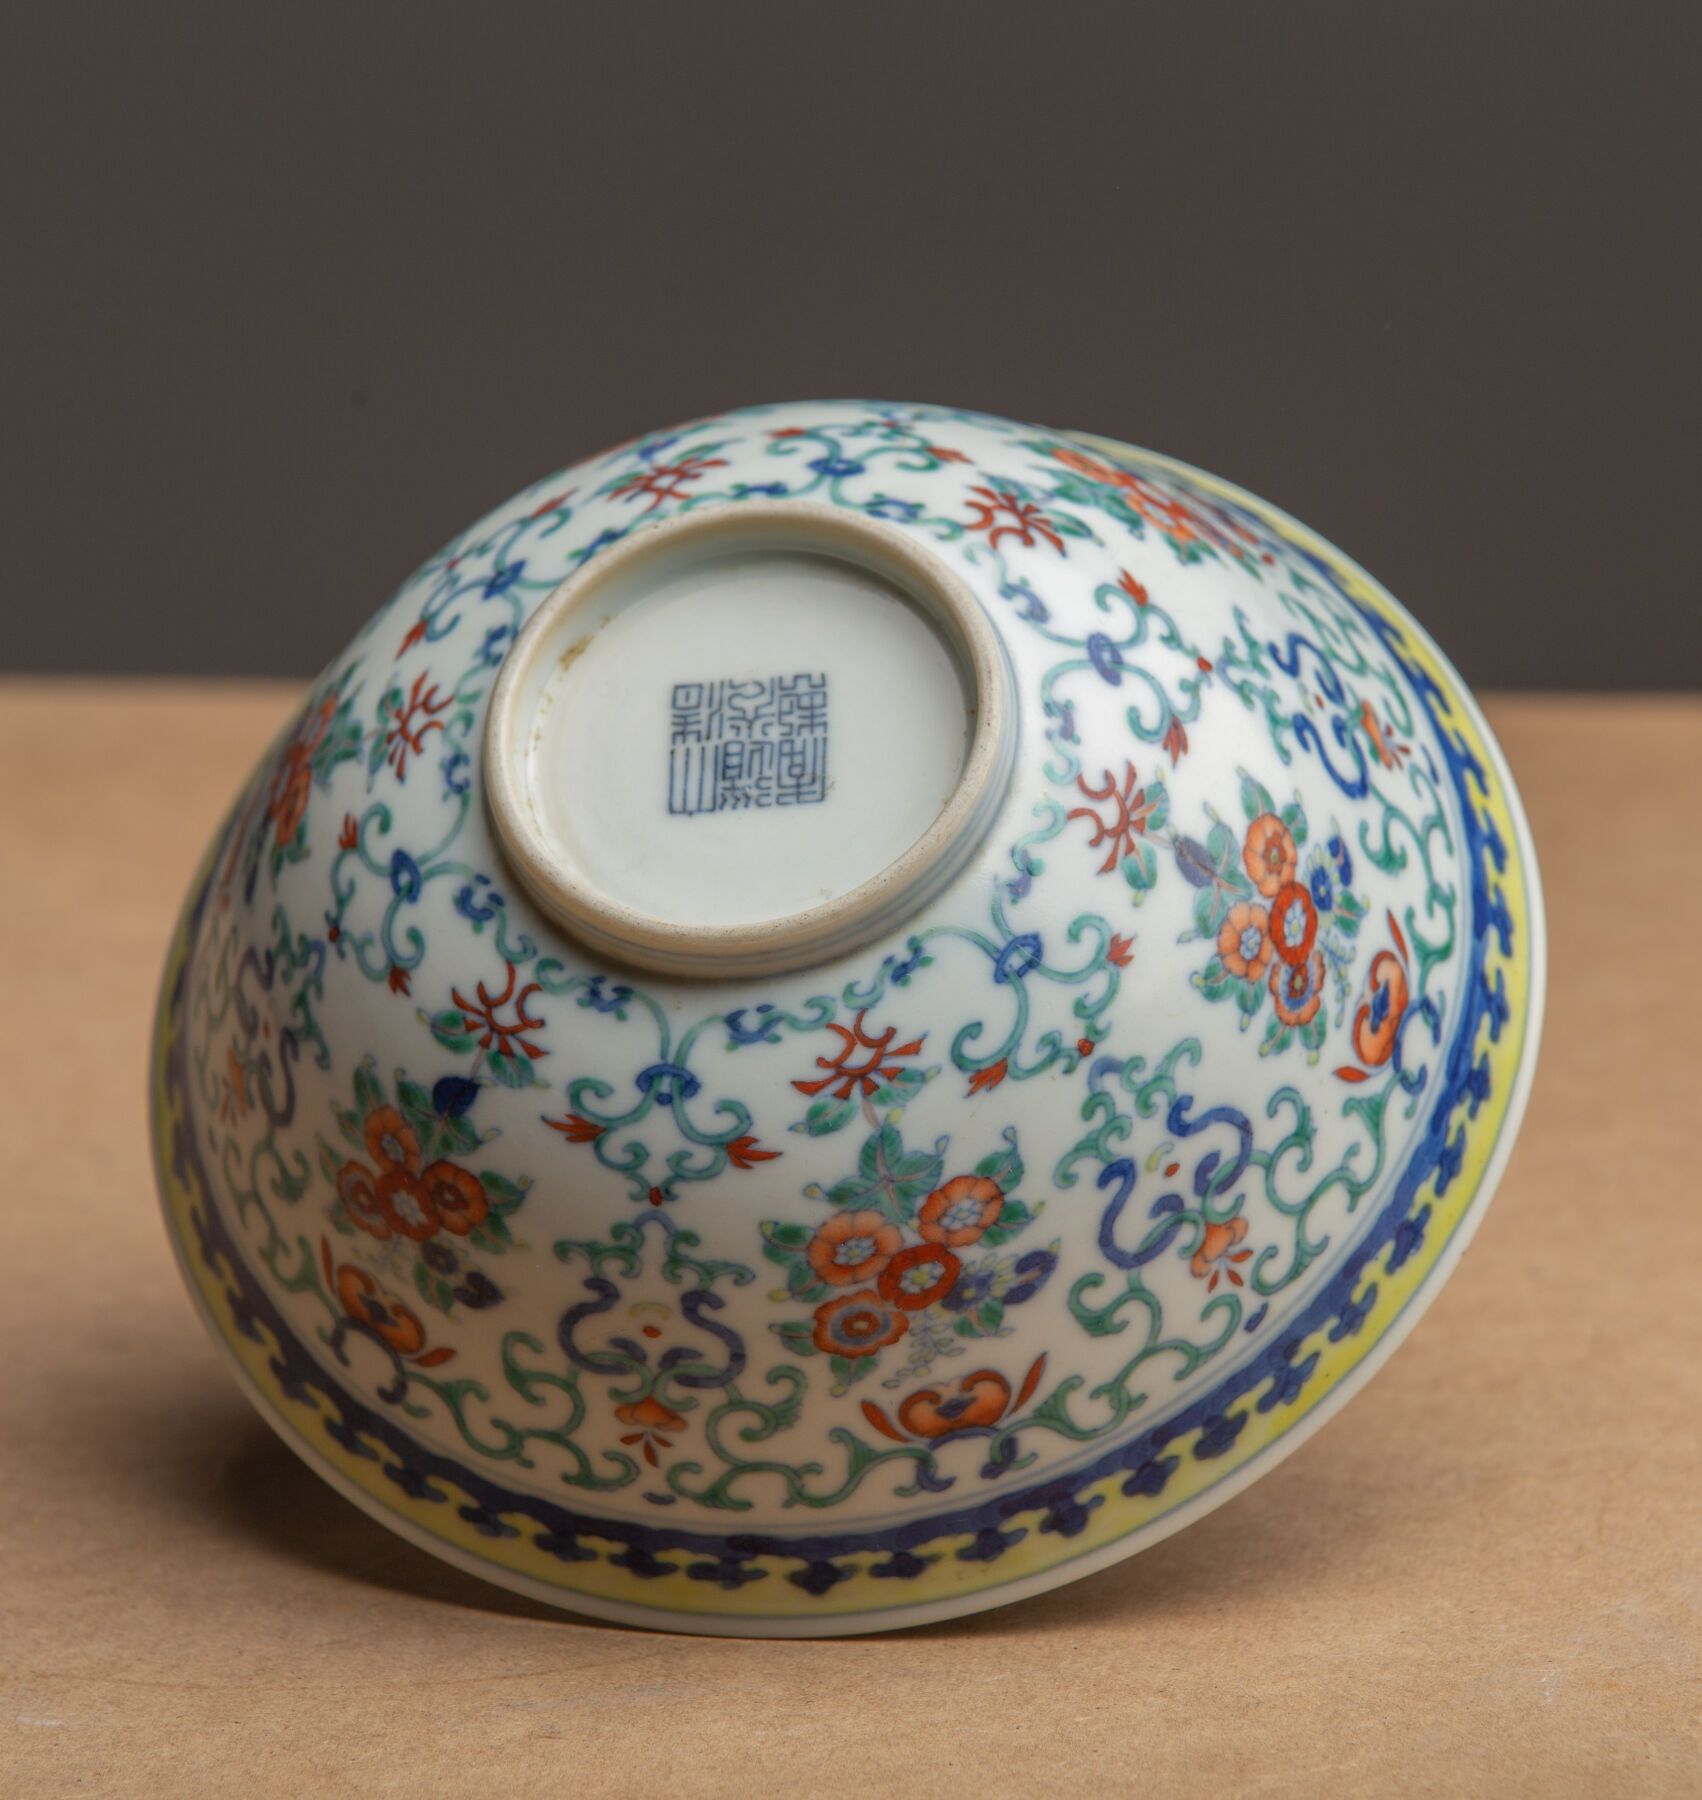 Null CHINA.
Porcelain and polychrome enamel bowl decorated with flowers and foli&hellip;